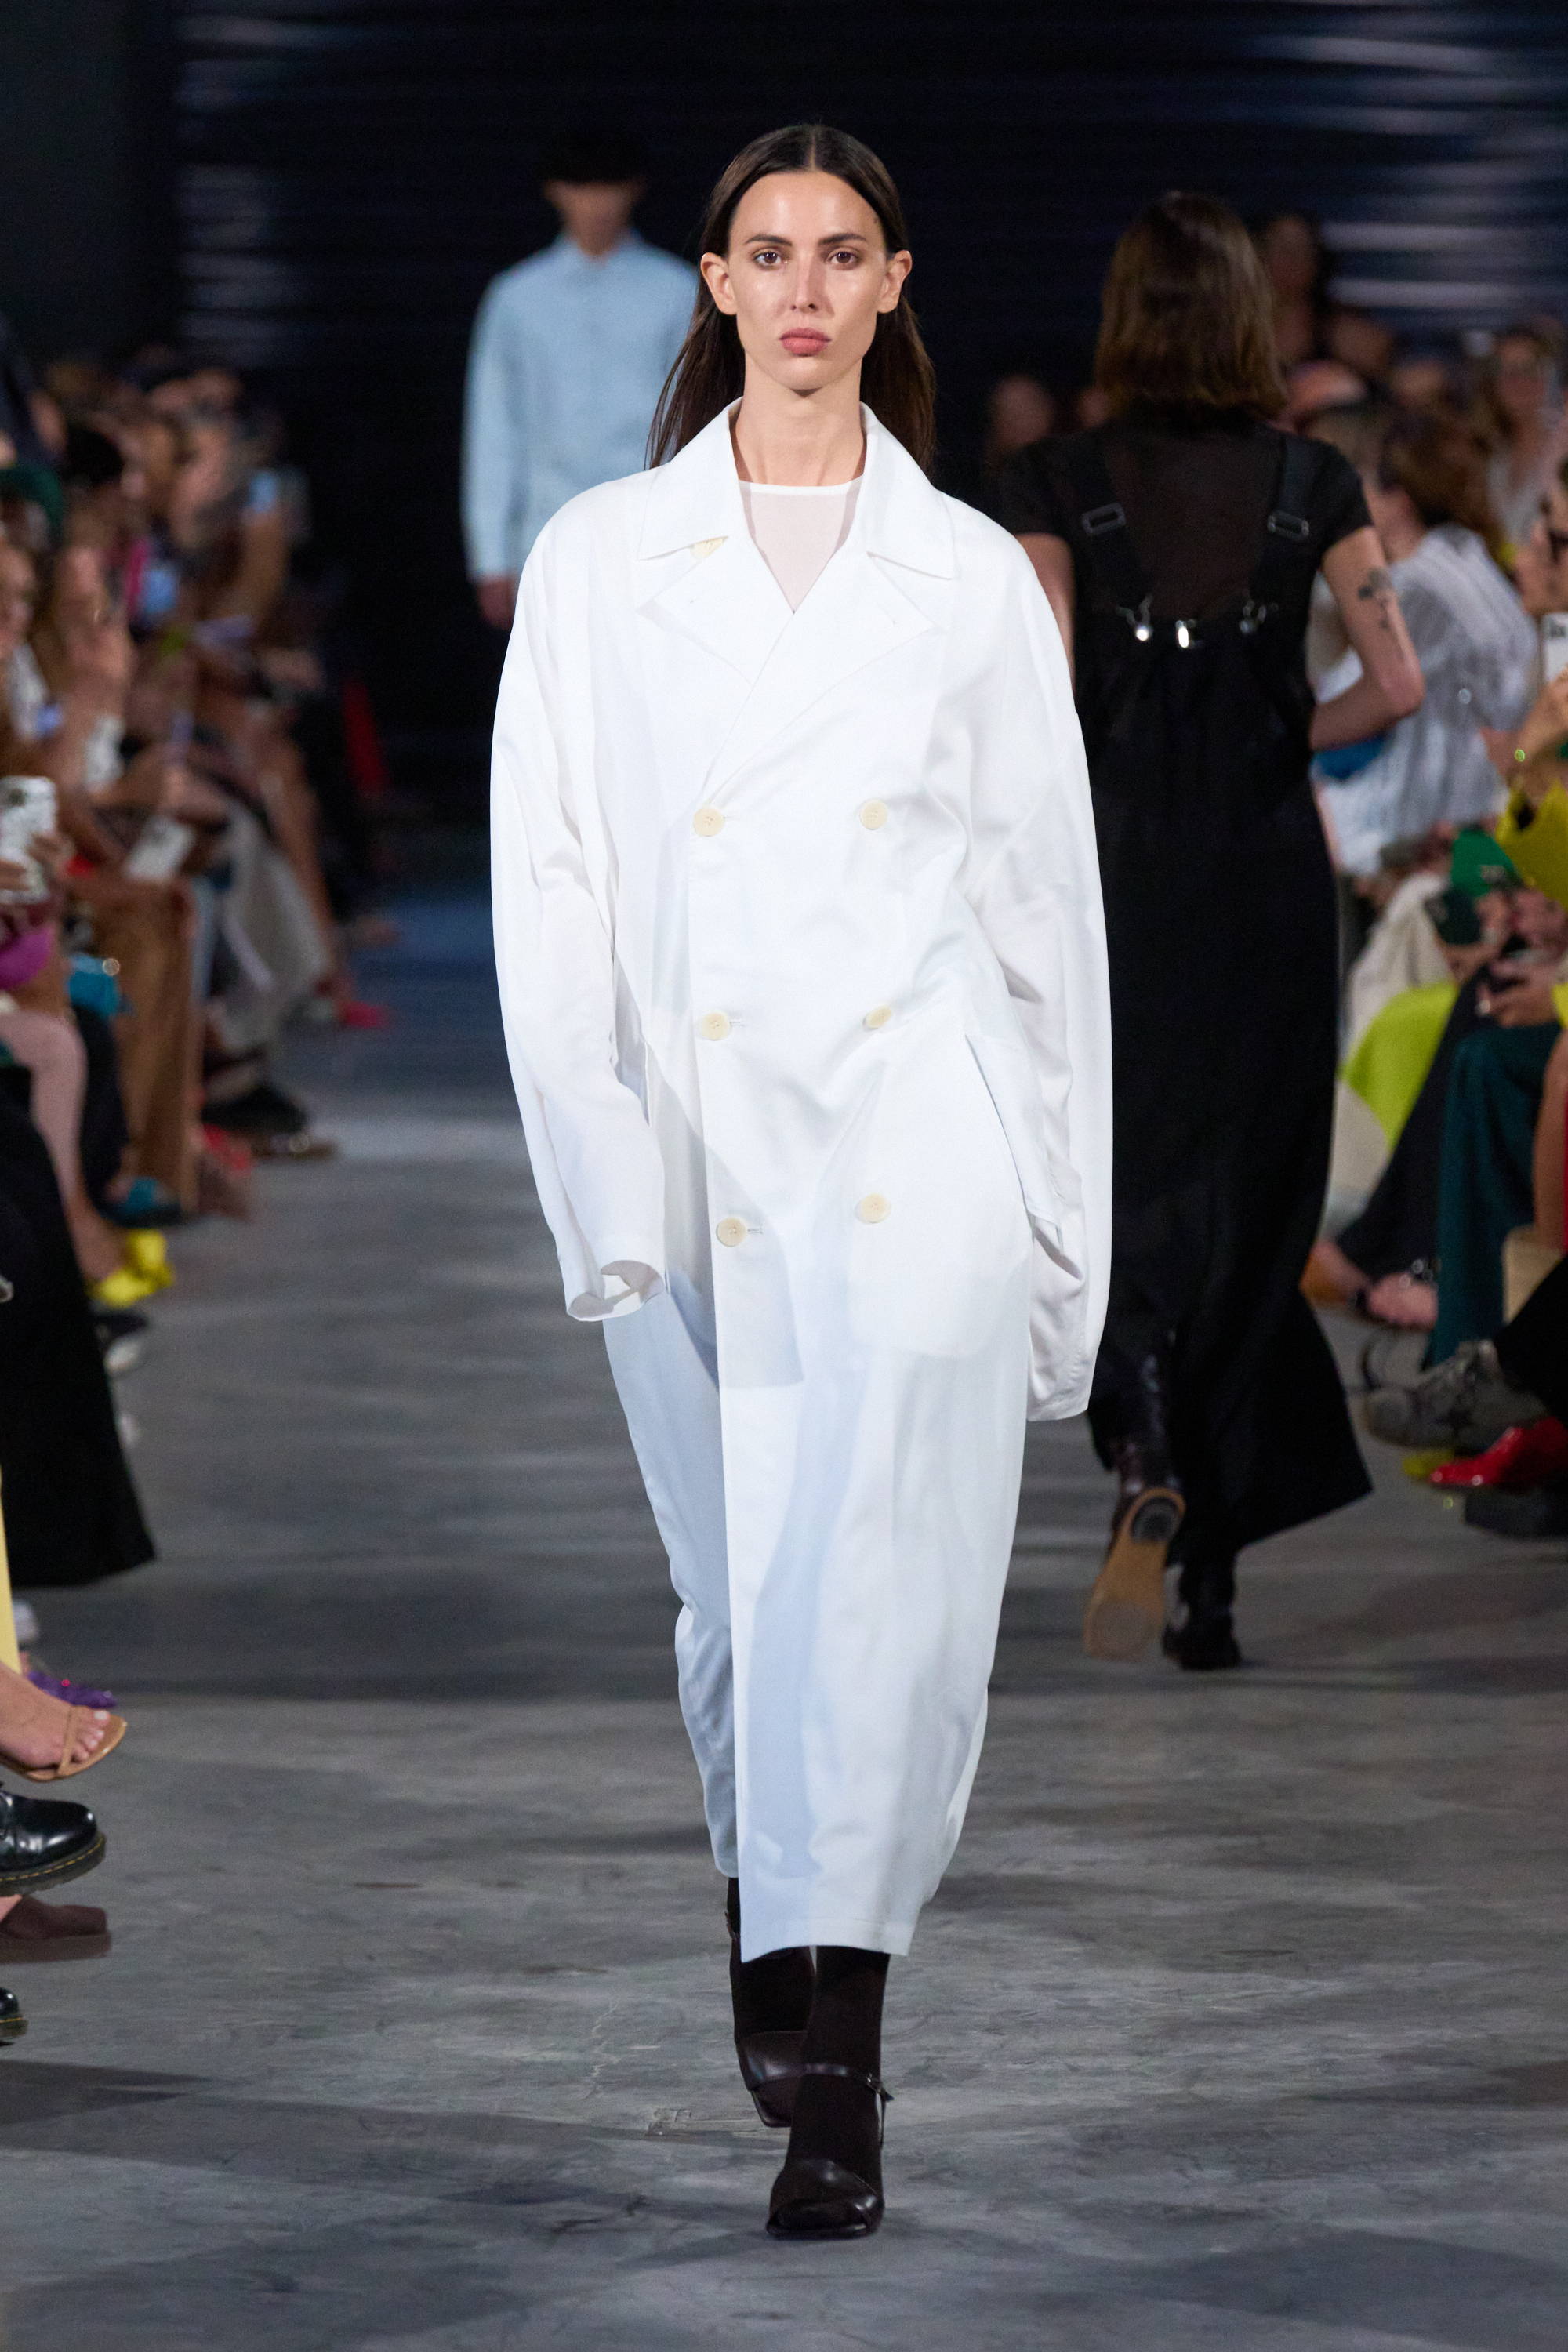 Model on a runway wearing white trench coat